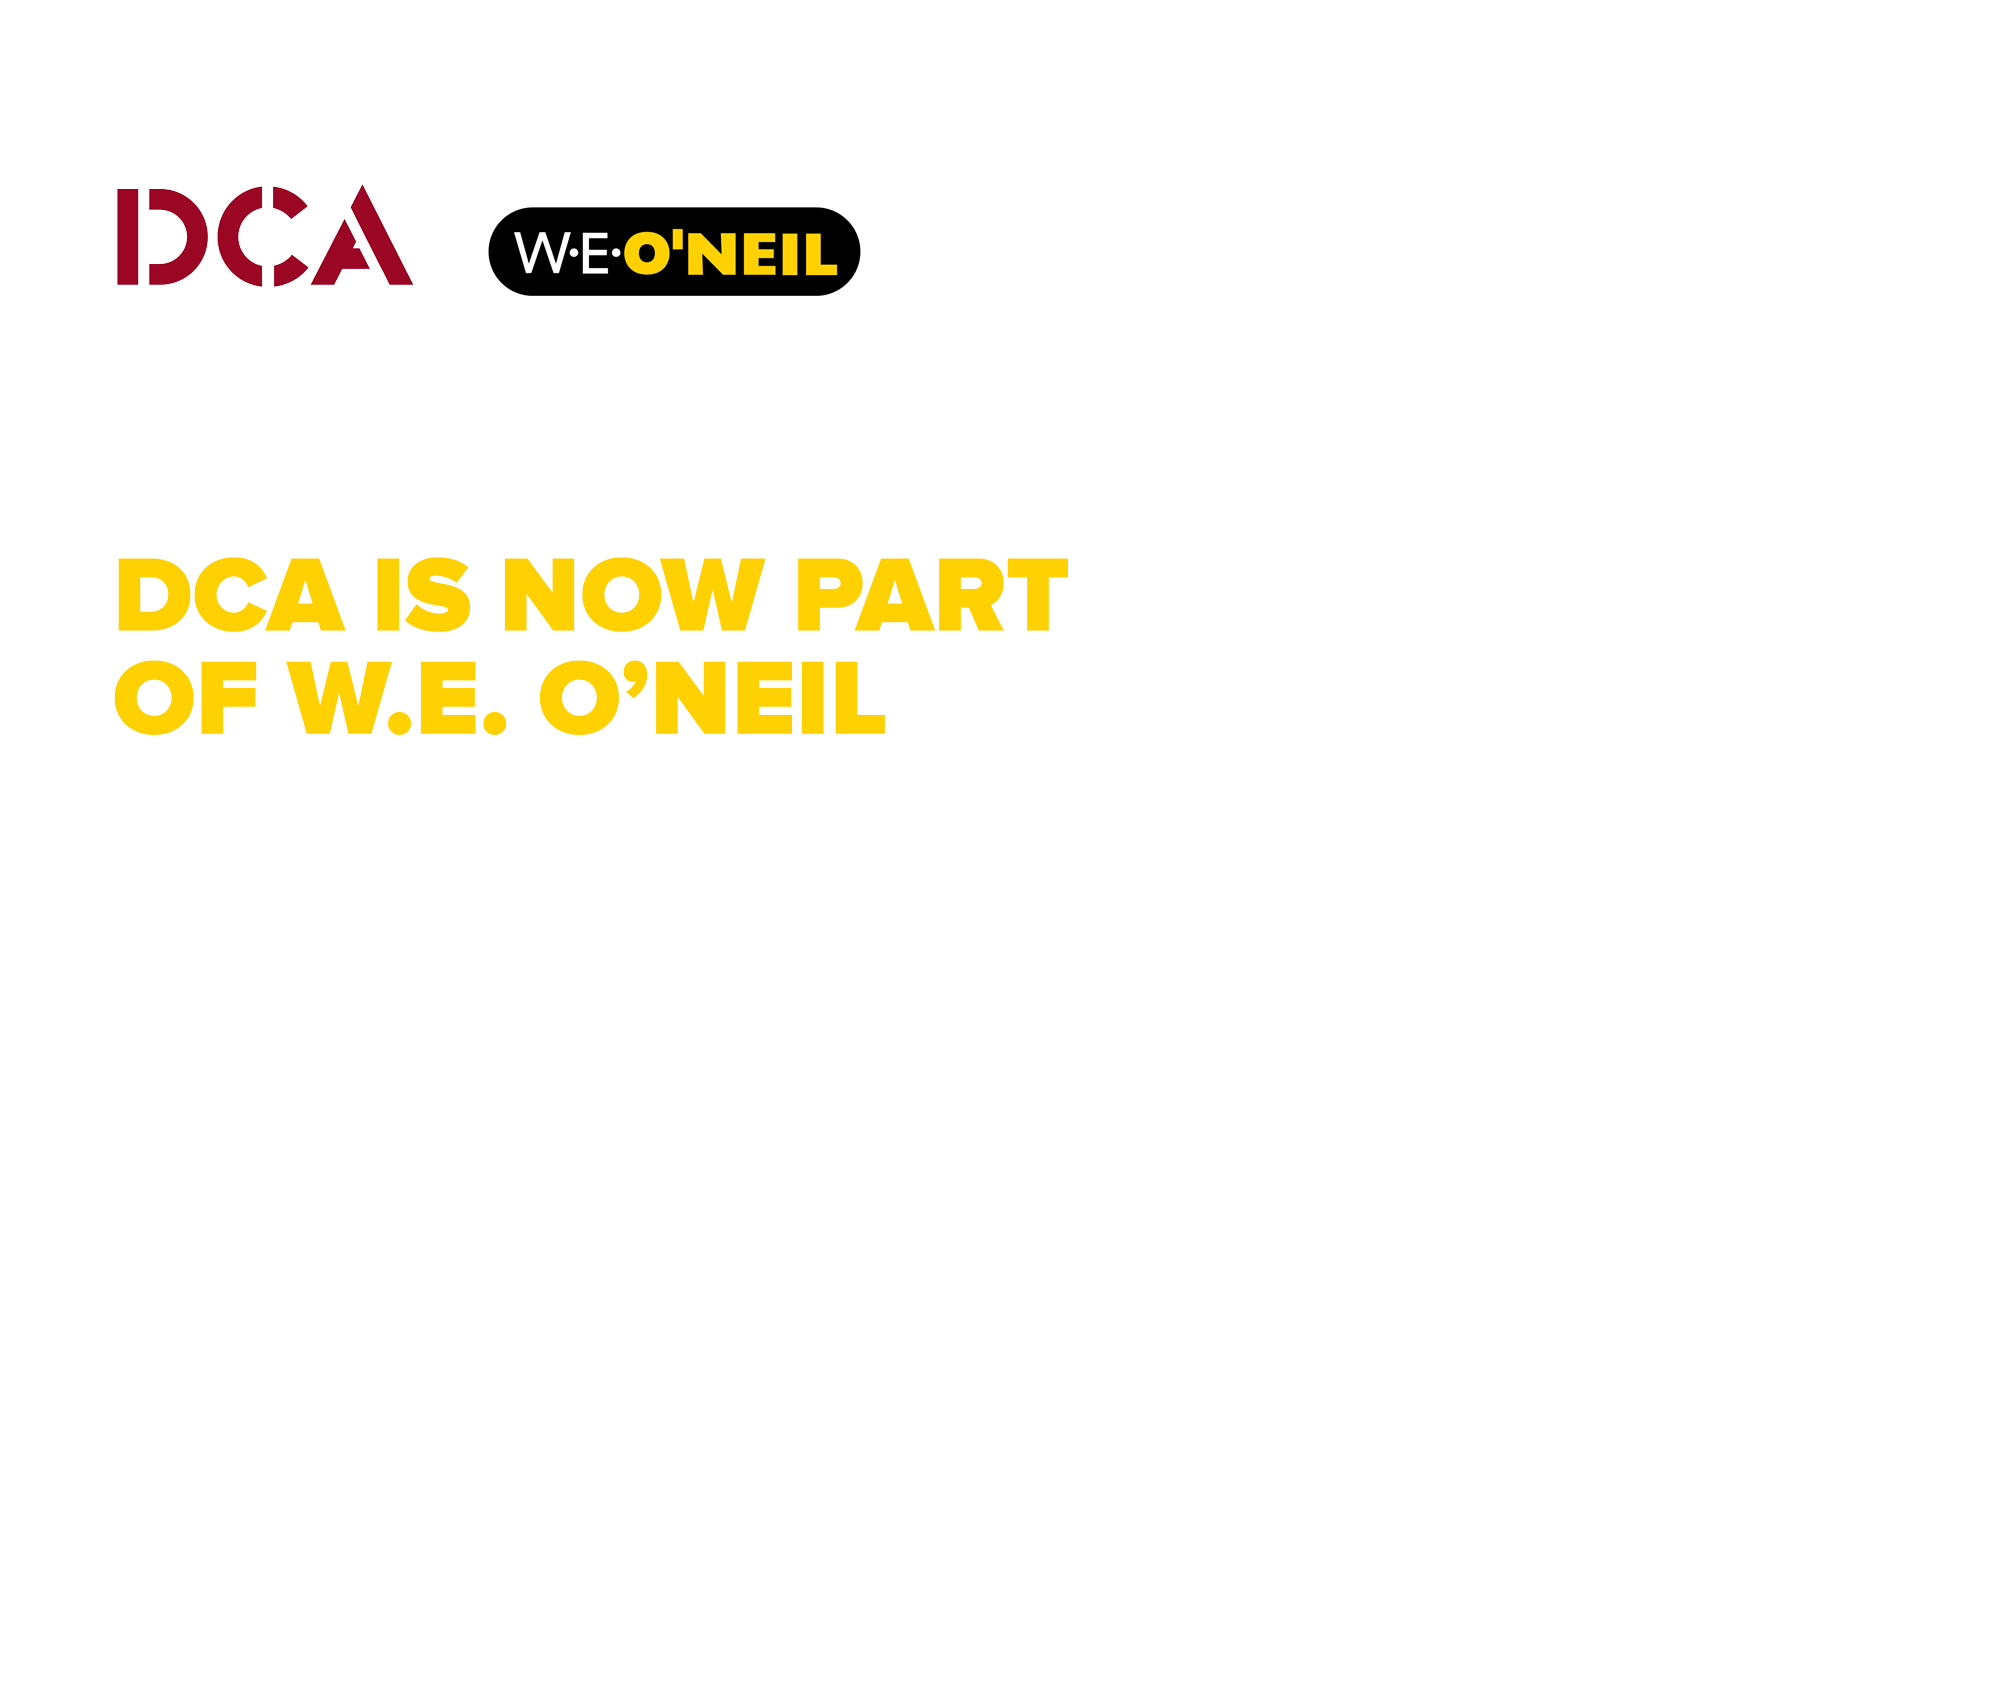 After 16 years of growth in central Texas, DCA is now part of W.E. O'Neil, a prominent national general contracting firm! We continue to be committed to the Austin market and look forward to an exciting new future for our employess, clients, and subcontractor partners. You will be automatically redirected in 10 seconds to the W.E. O'Neil website.